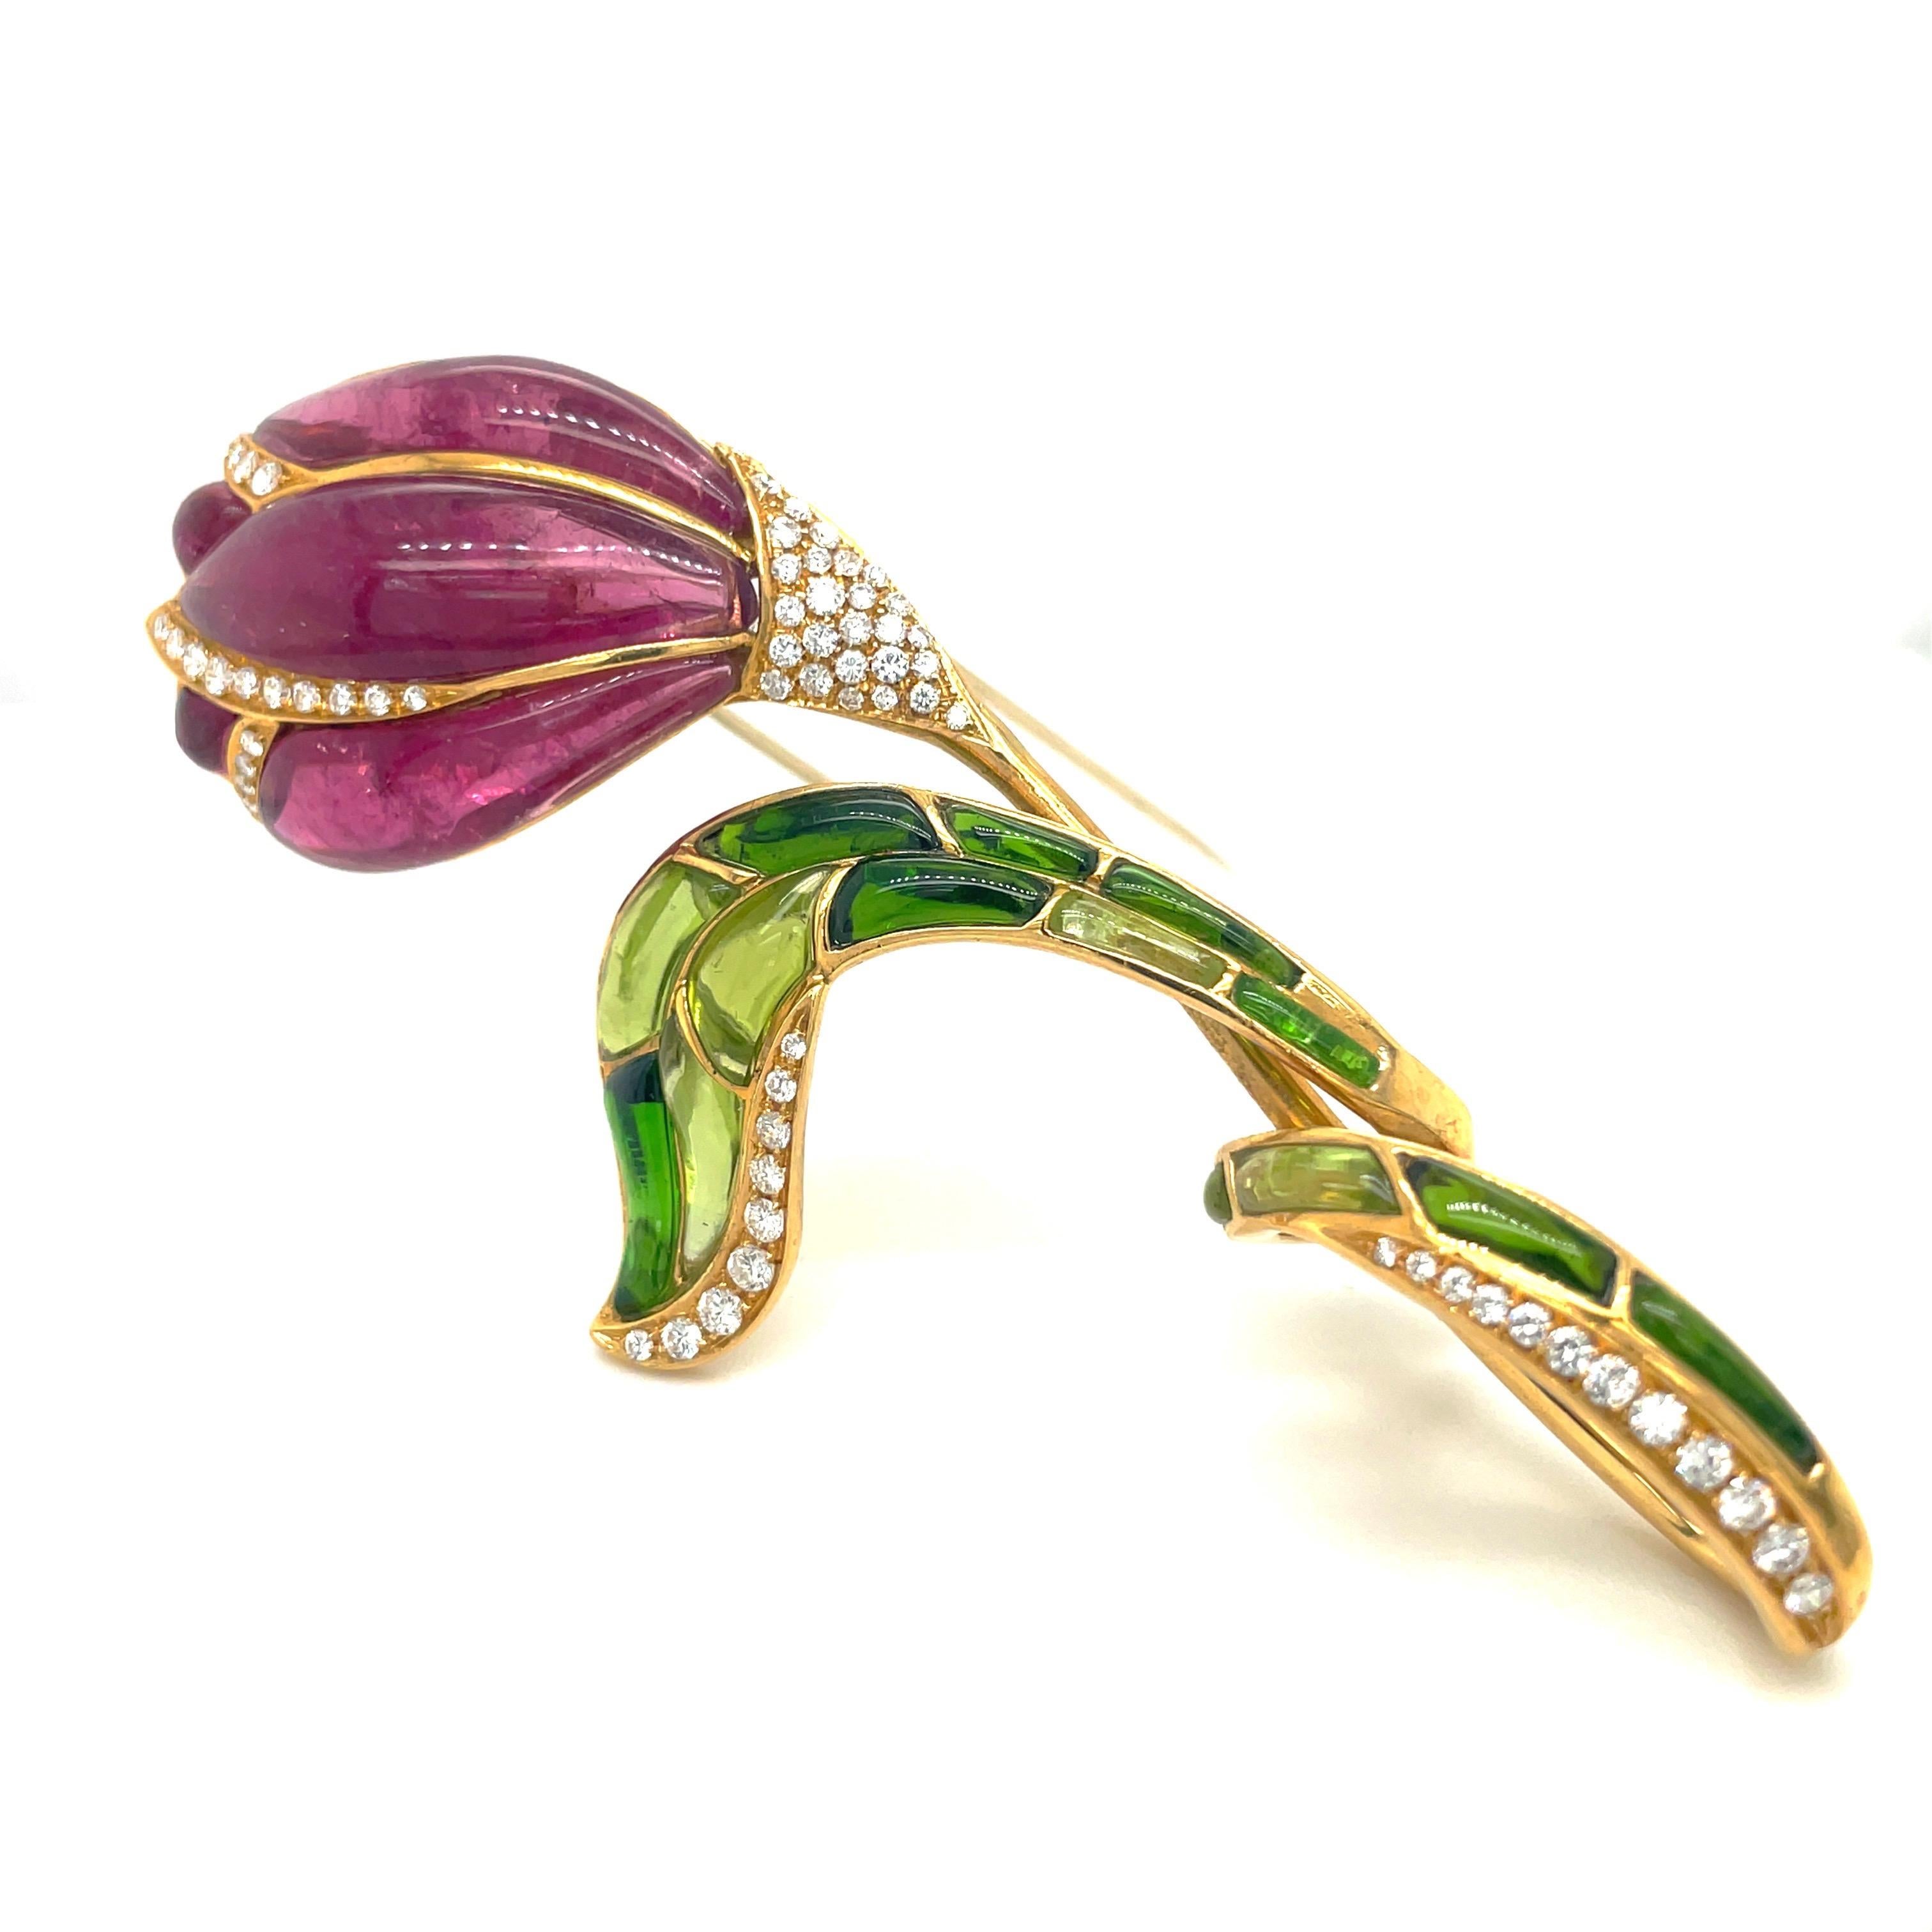 Made for Cellini by Roberto Casarin, this timeless and elegant yellow gold brooch, with natural rubelite petals, green tourmaline /peridot leaves and 1.00 carat diamond stem is the perfect brooch for any occasion. Made in Italy by Roberto